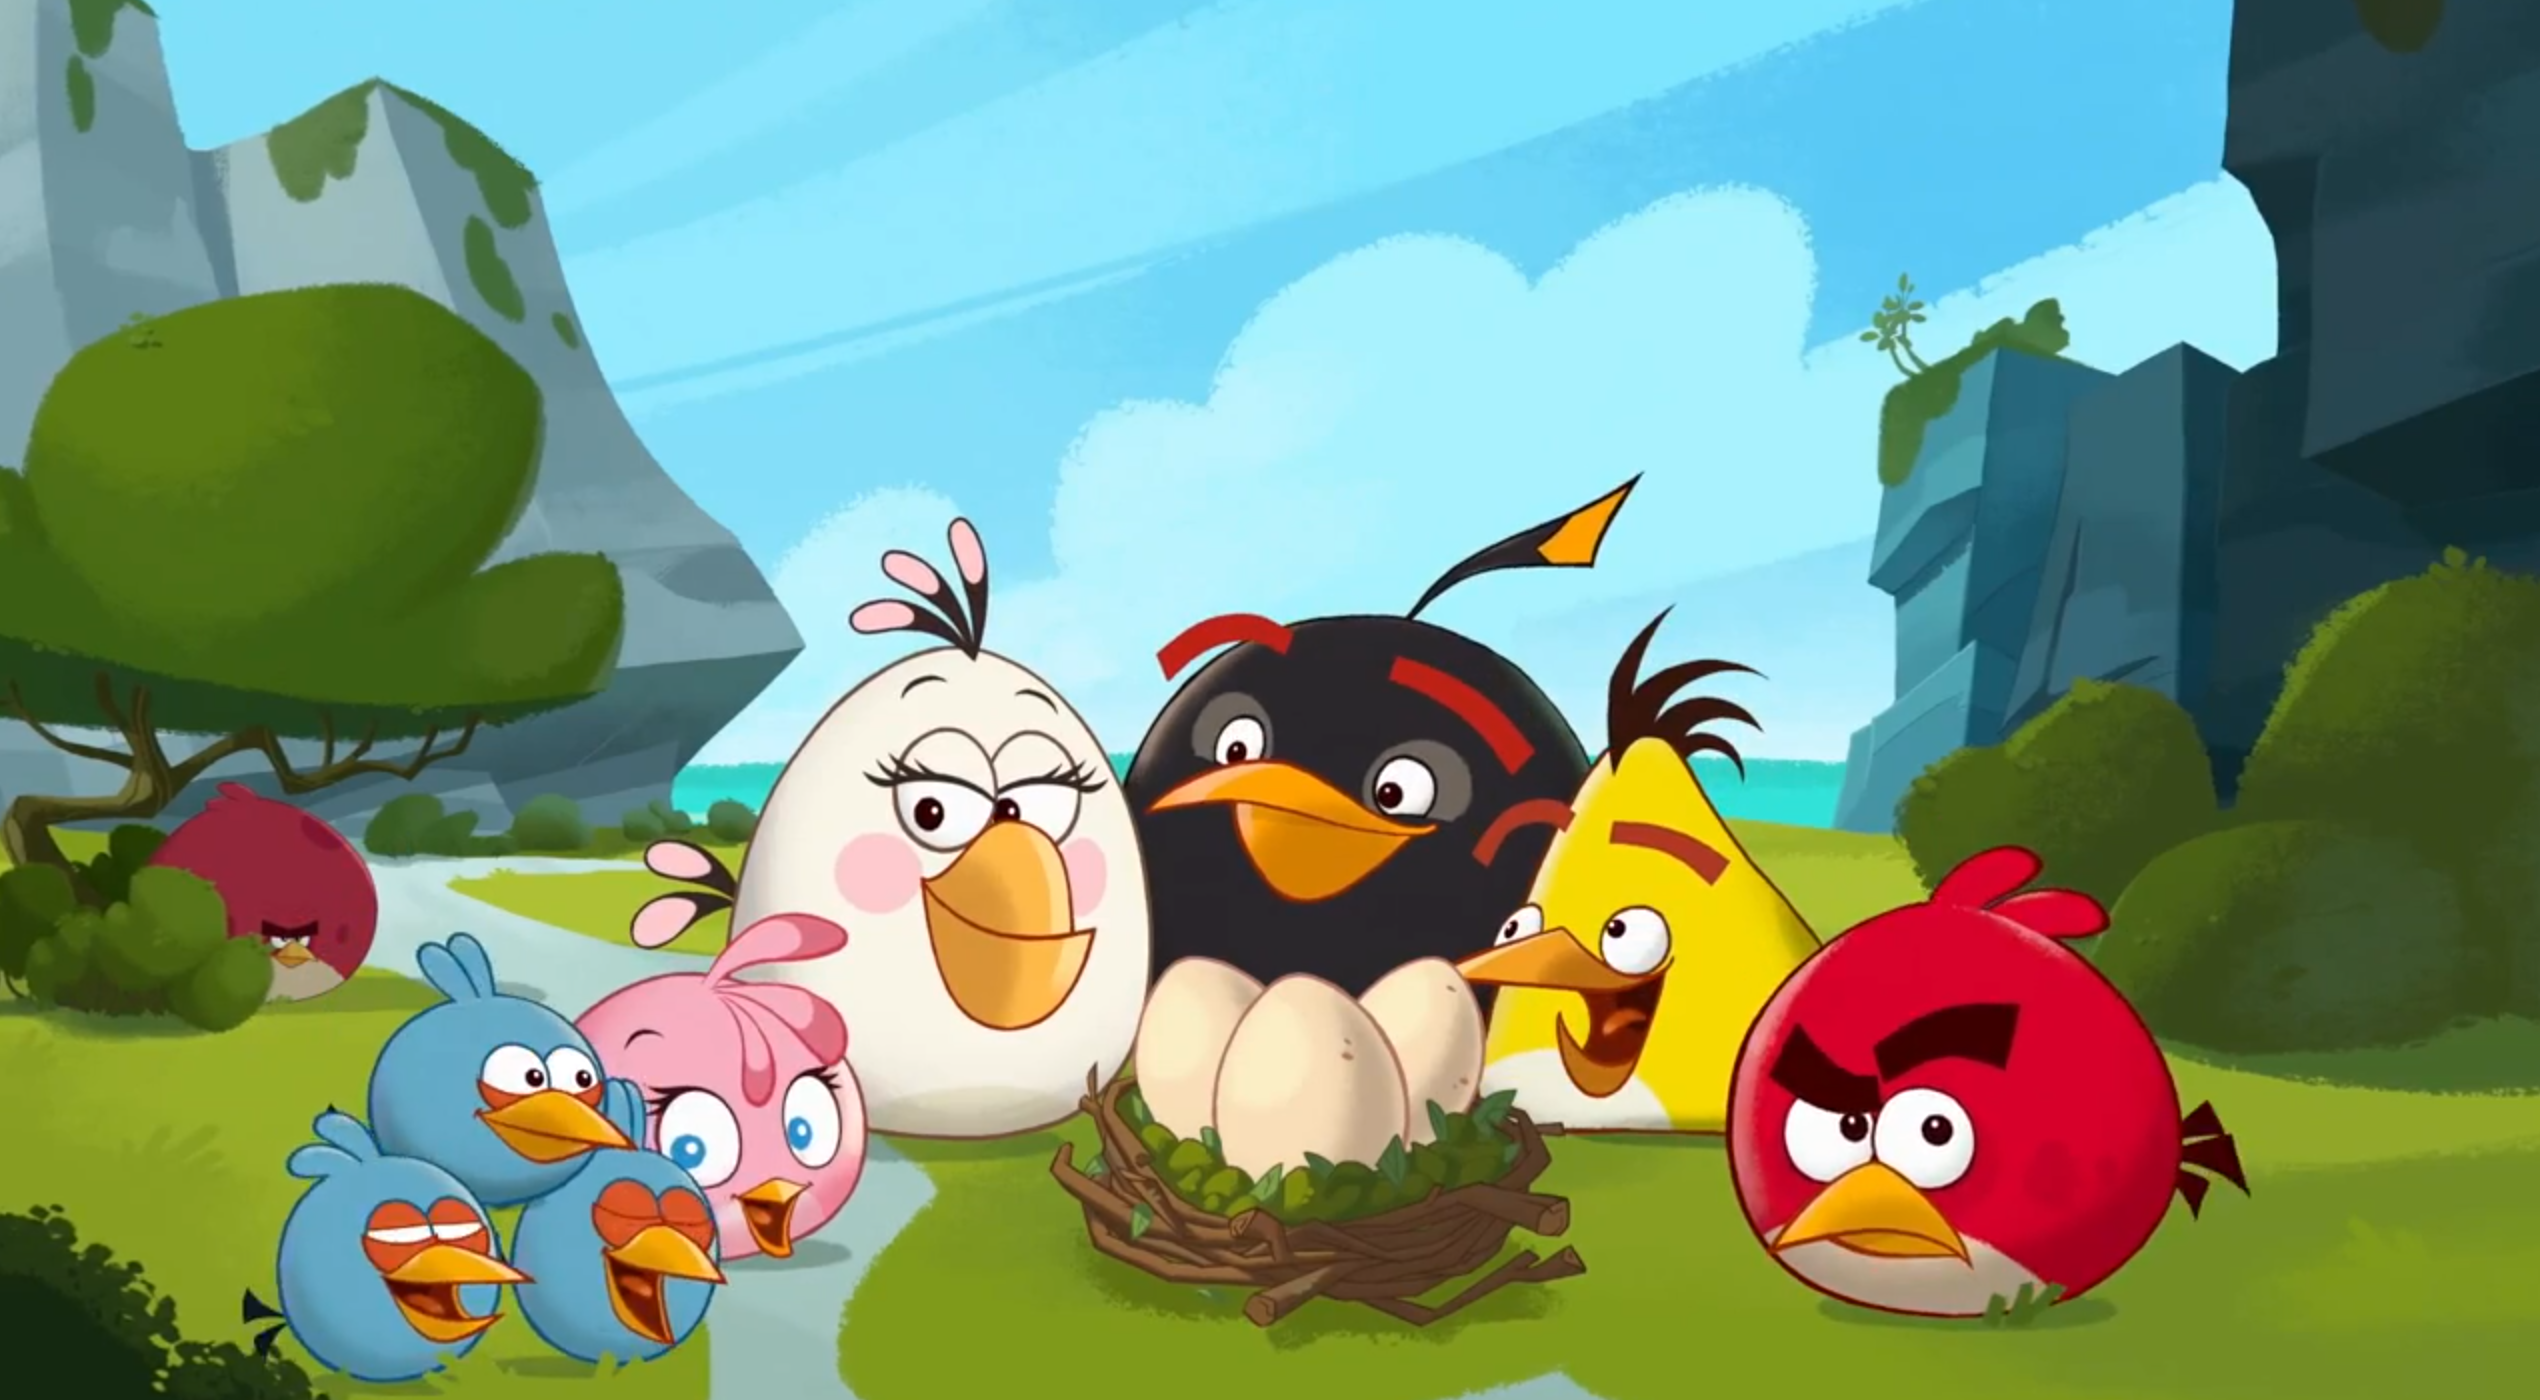 angry birds live wallpaper,animated cartoon,angry birds,cartoon,video game software,illustration